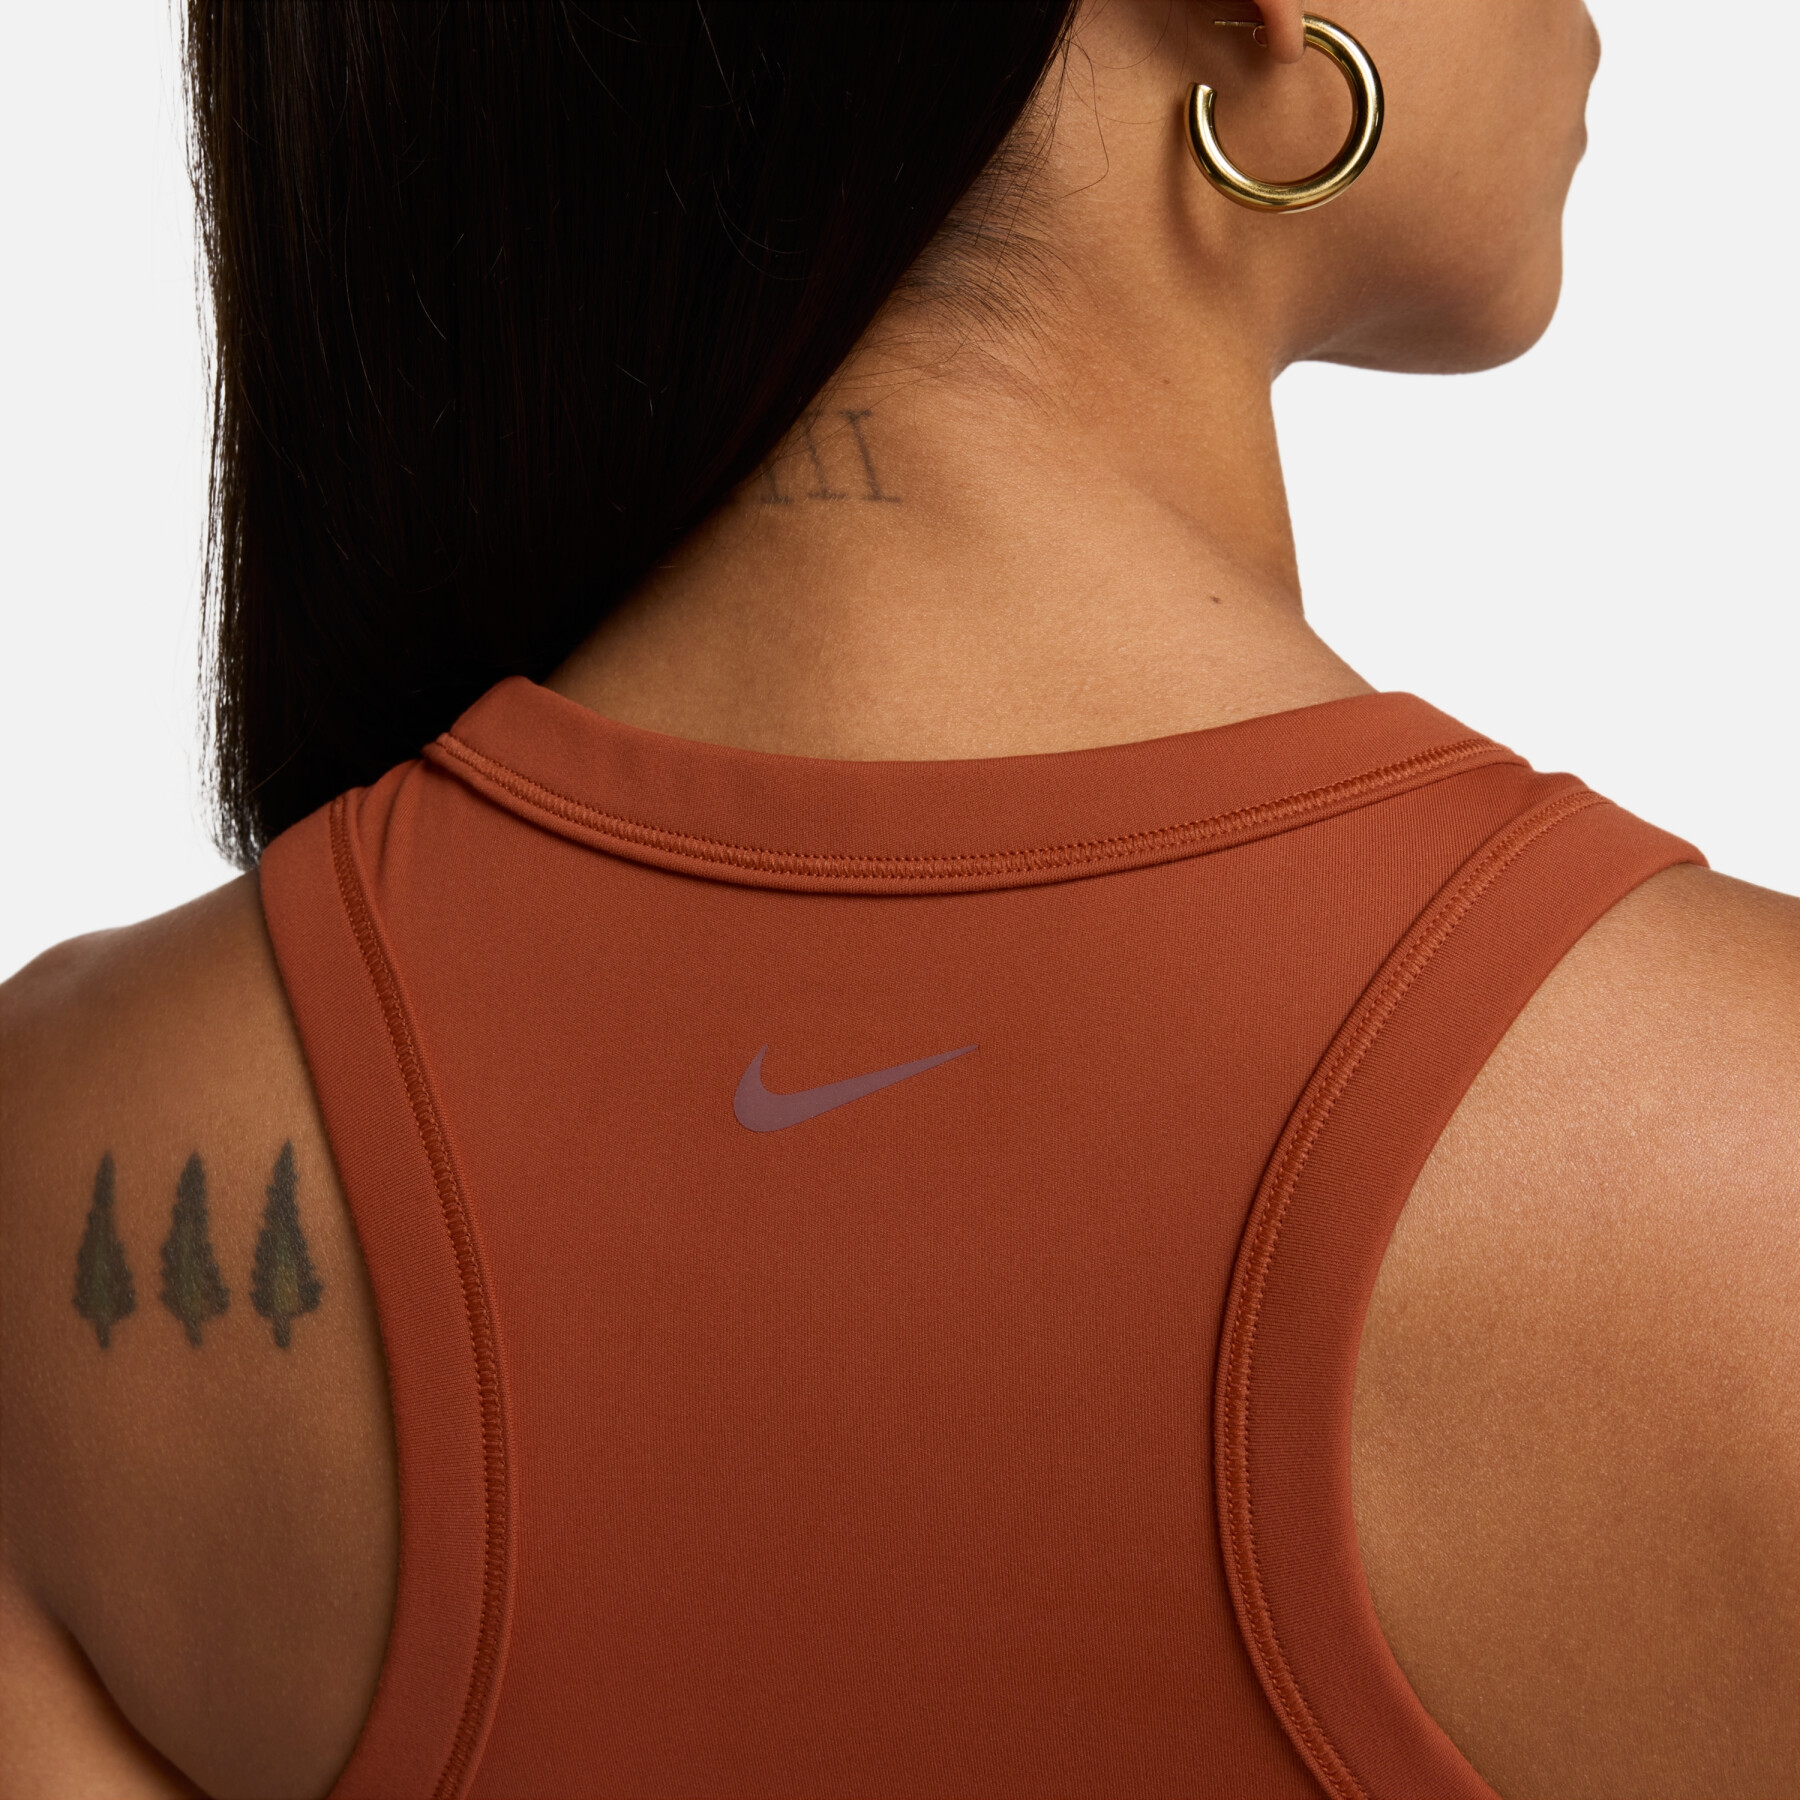 Women's fitted crop top Nike One